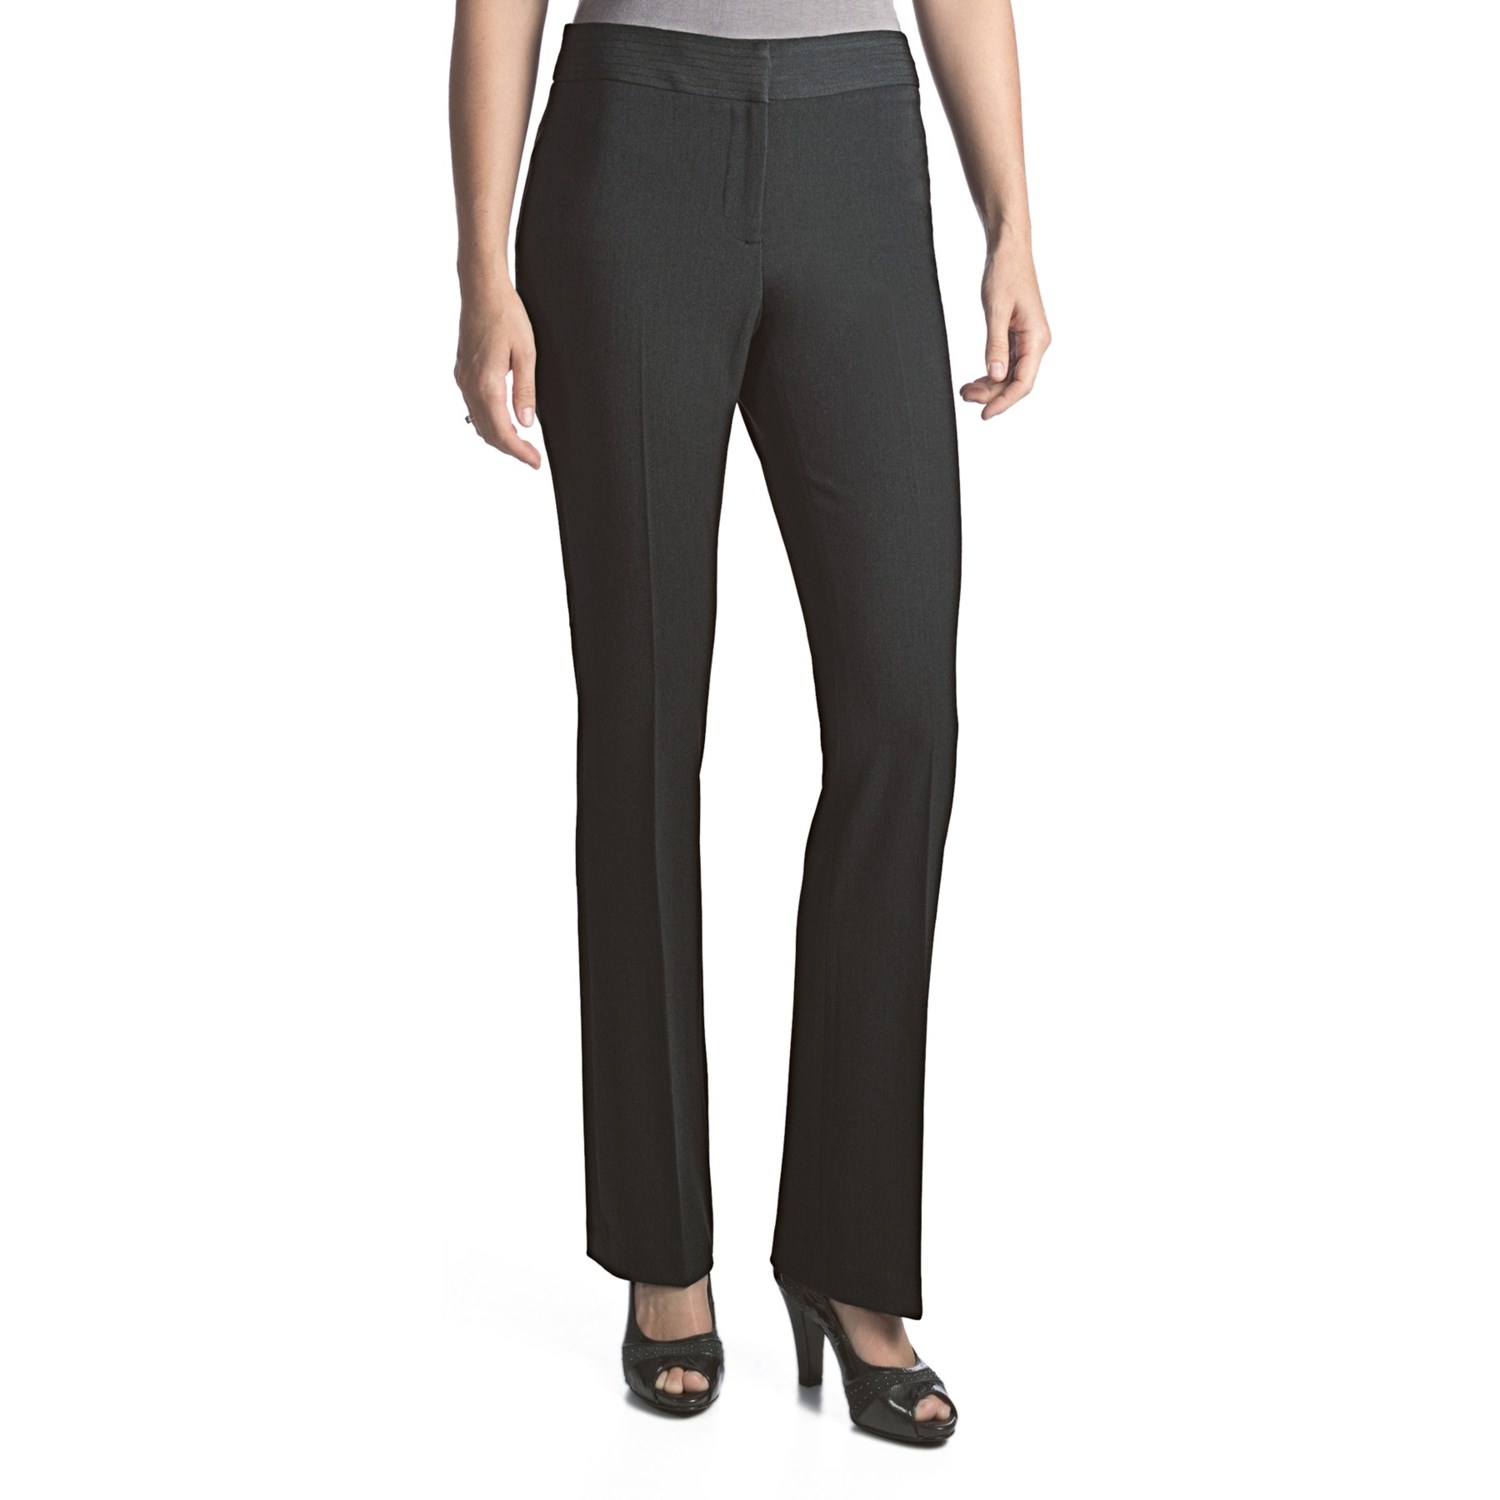 Atelier Luxe Barely Boot Dress Pants - Modern Fit (For Women) - Save 79%